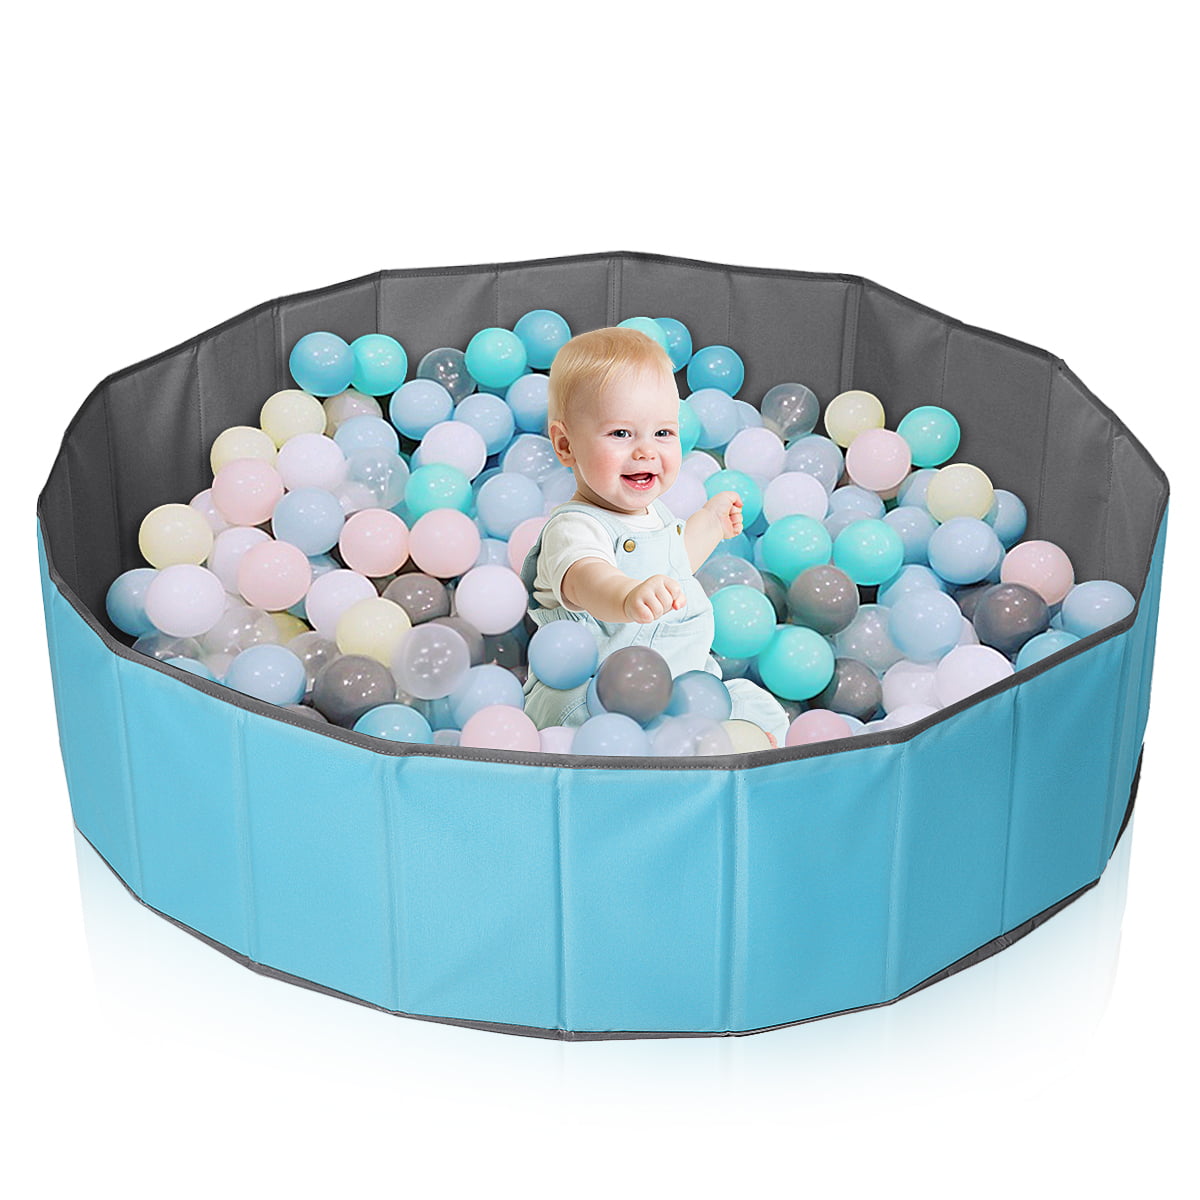 Foldable Kids Ocean Pool Ball Pit Game Children Play Toy  Baby Safe Playpen CB 